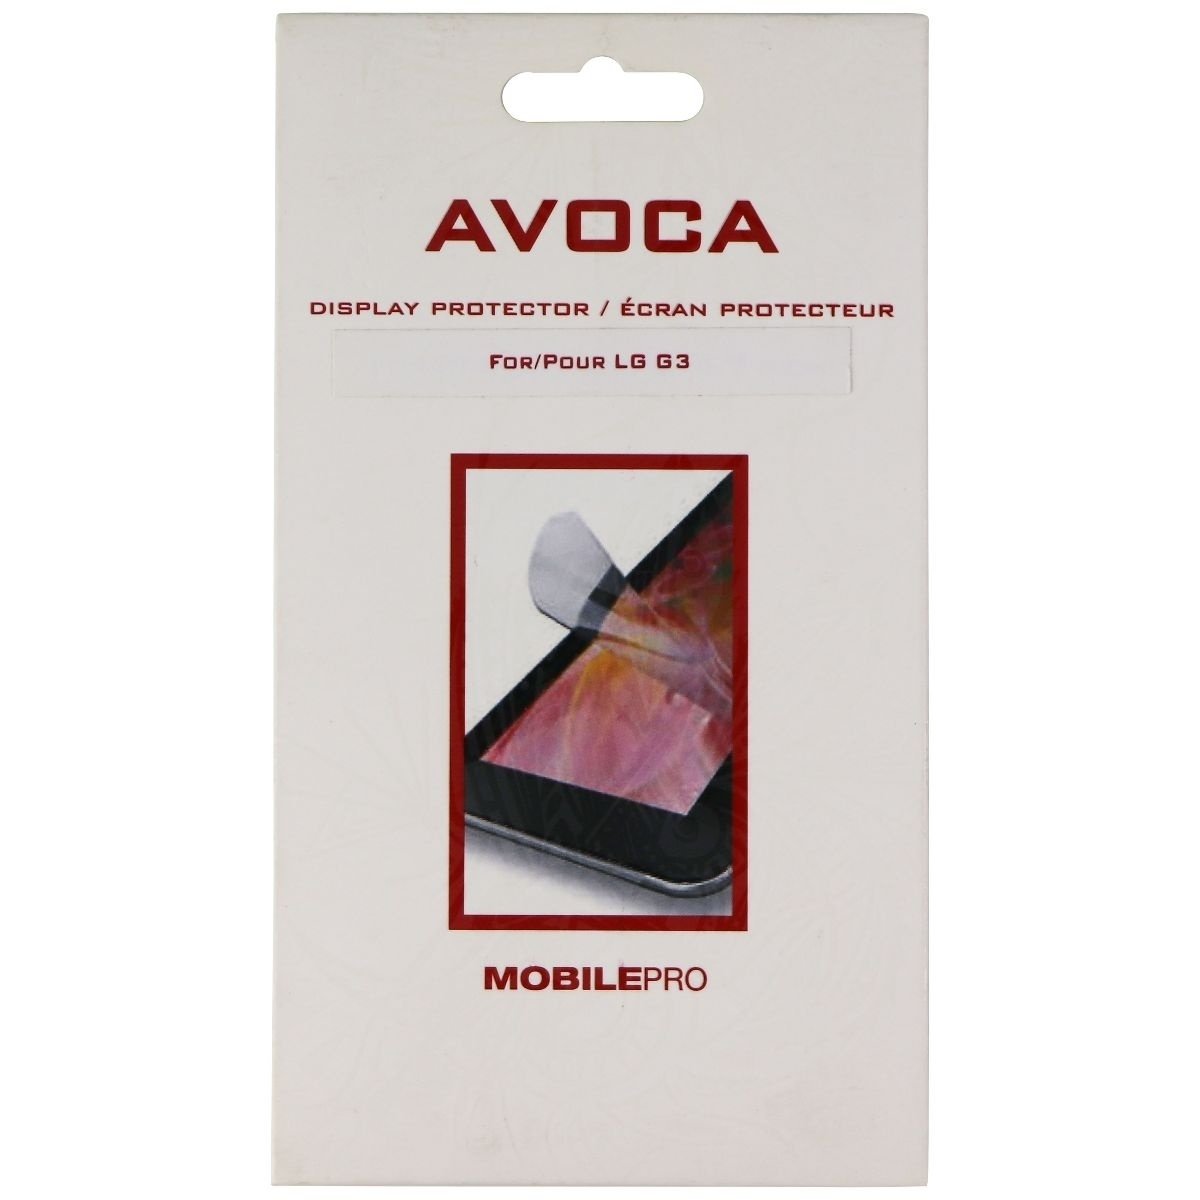 Avoca MobilePro Display Protector For LG G3 (2014) Smartphone - Clear